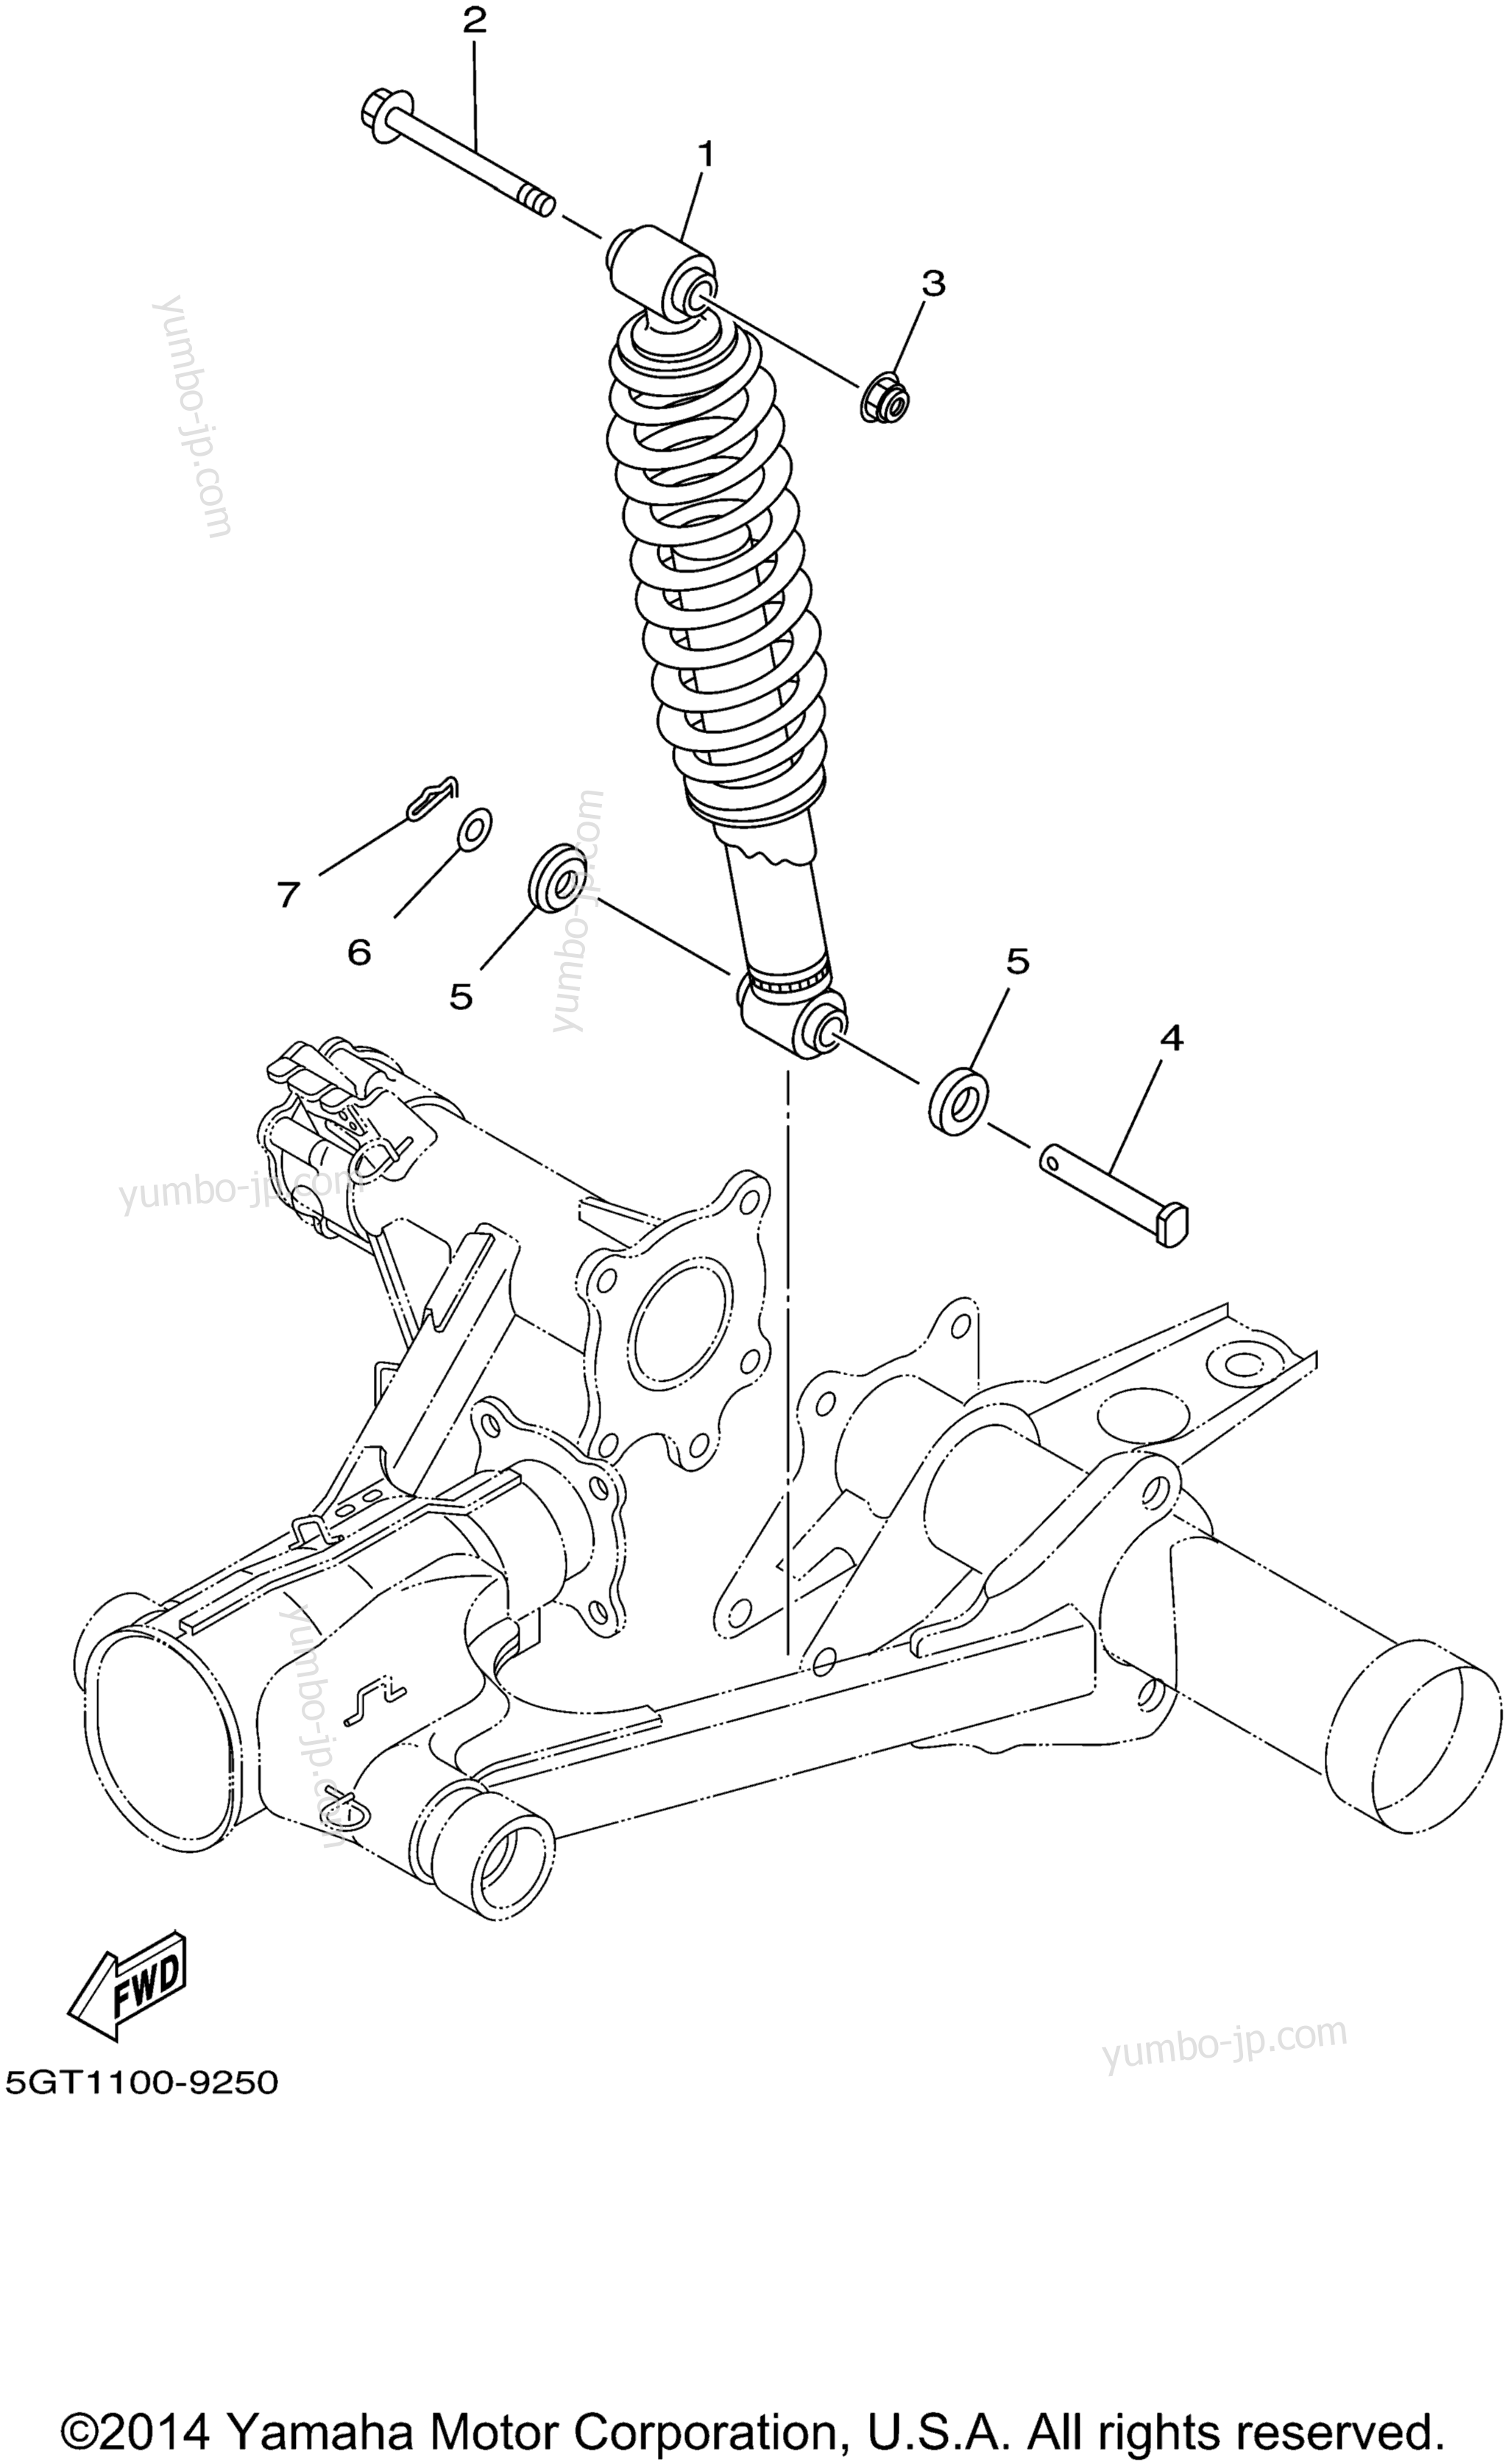 Rear Suspension for ATVs YAMAHA GRIZZLY (YFM600FWAL) CA 1999 year